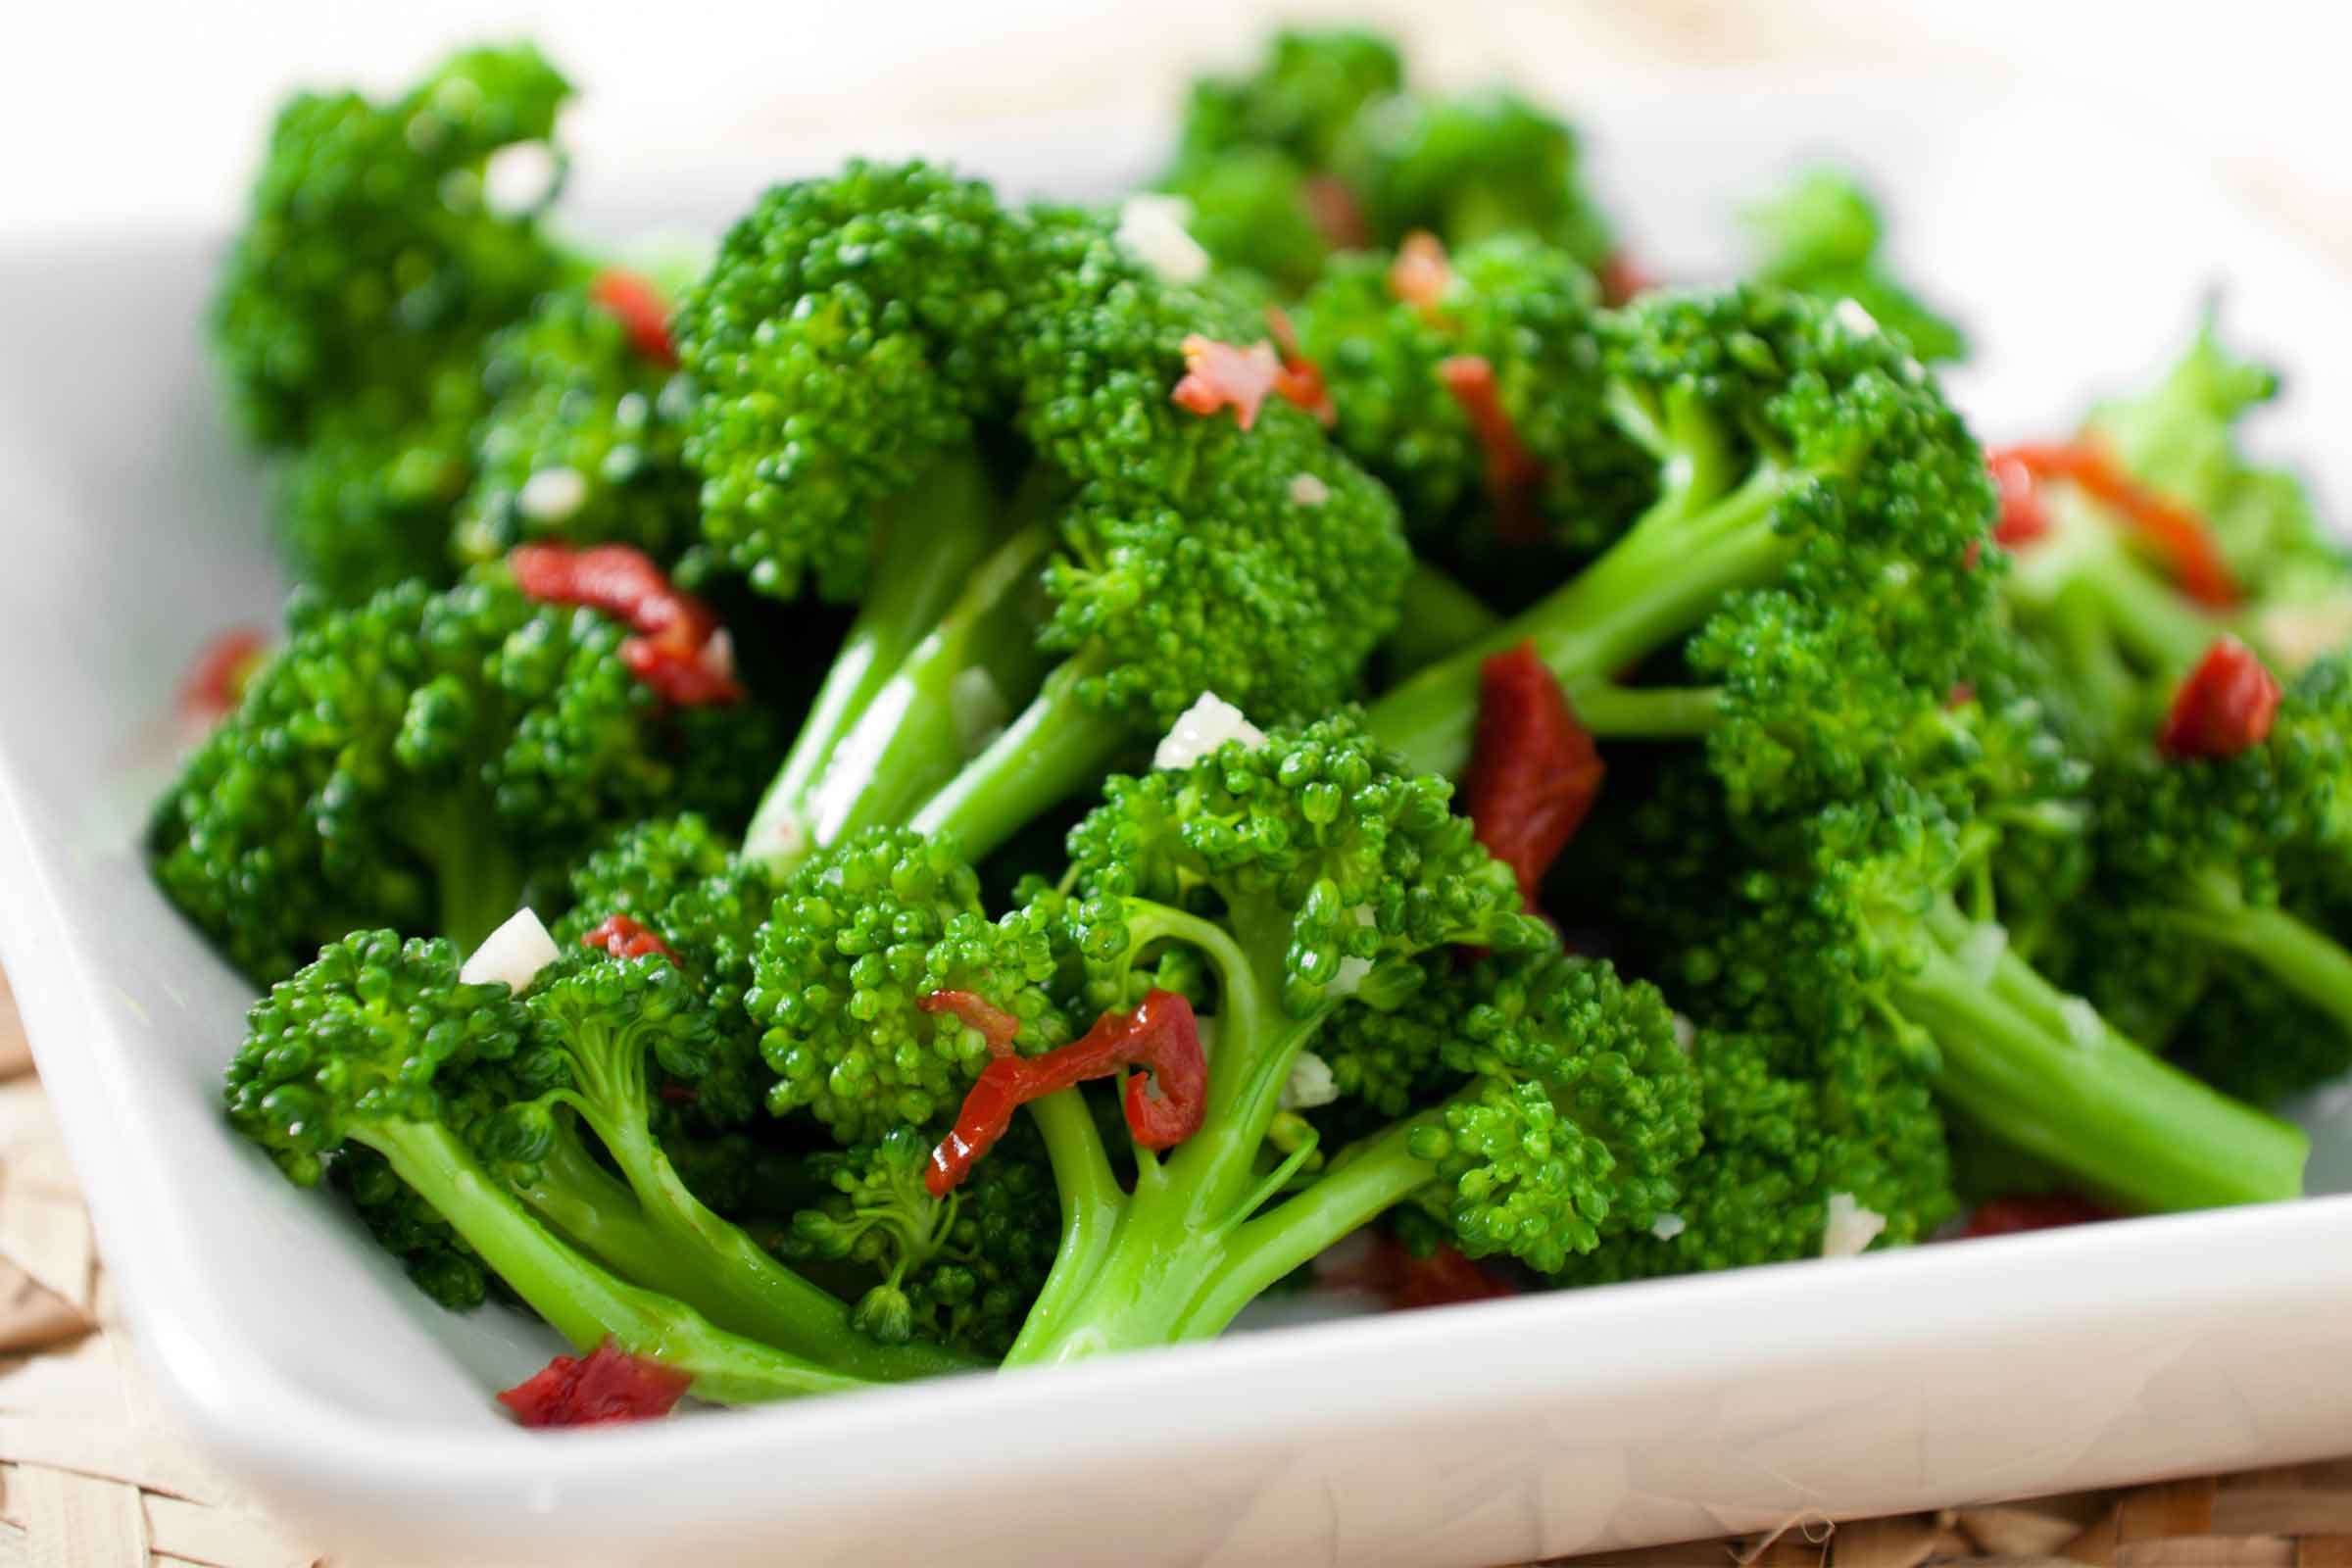 Want to detox? Skip the pills, buy more broccoli